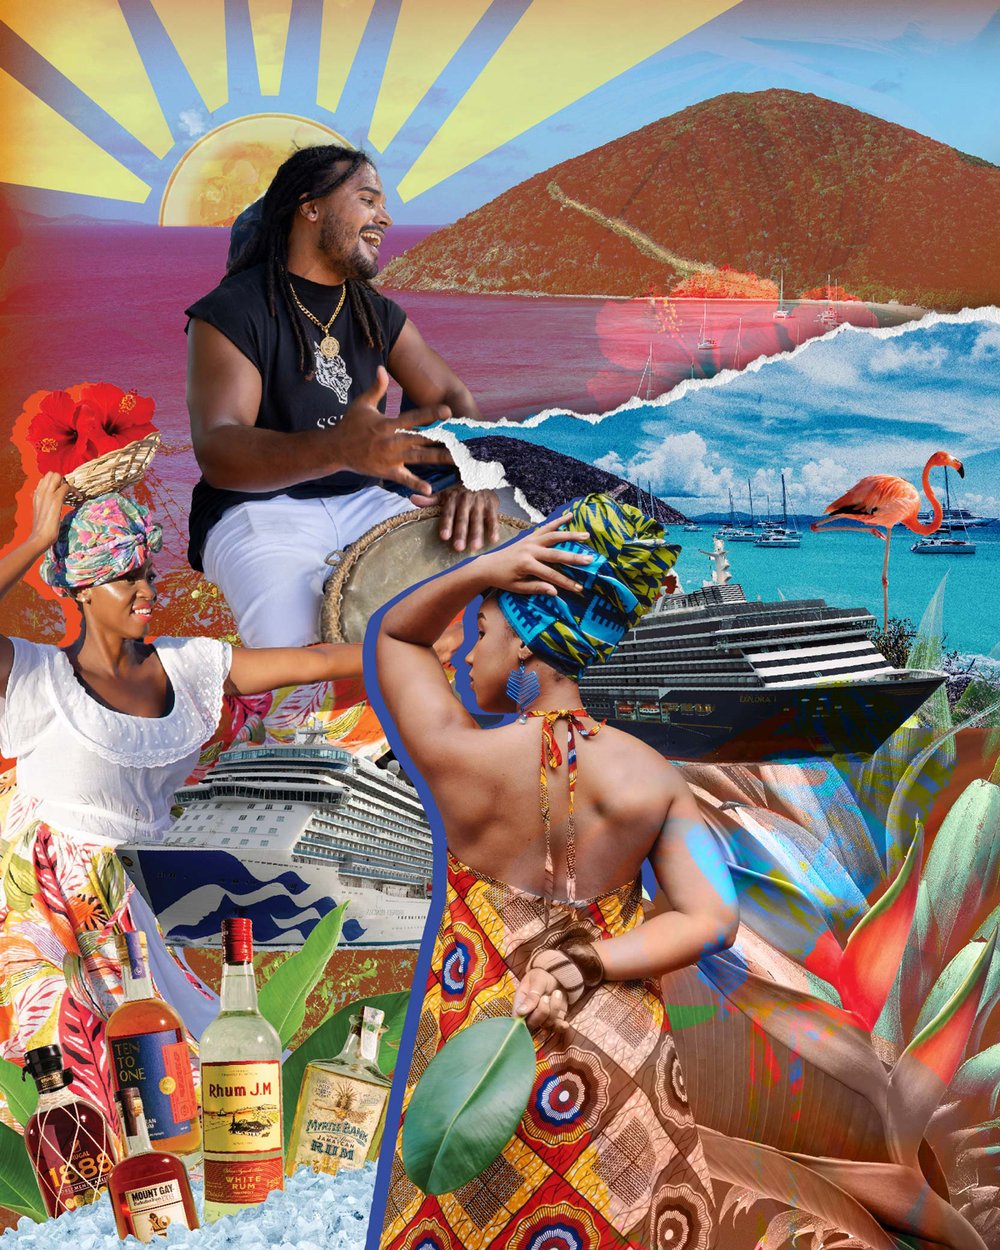 A collage including a woman wearing a colorful headtie, a drummer, a dancer, two cruise ships, and Caribbean rum bottles.